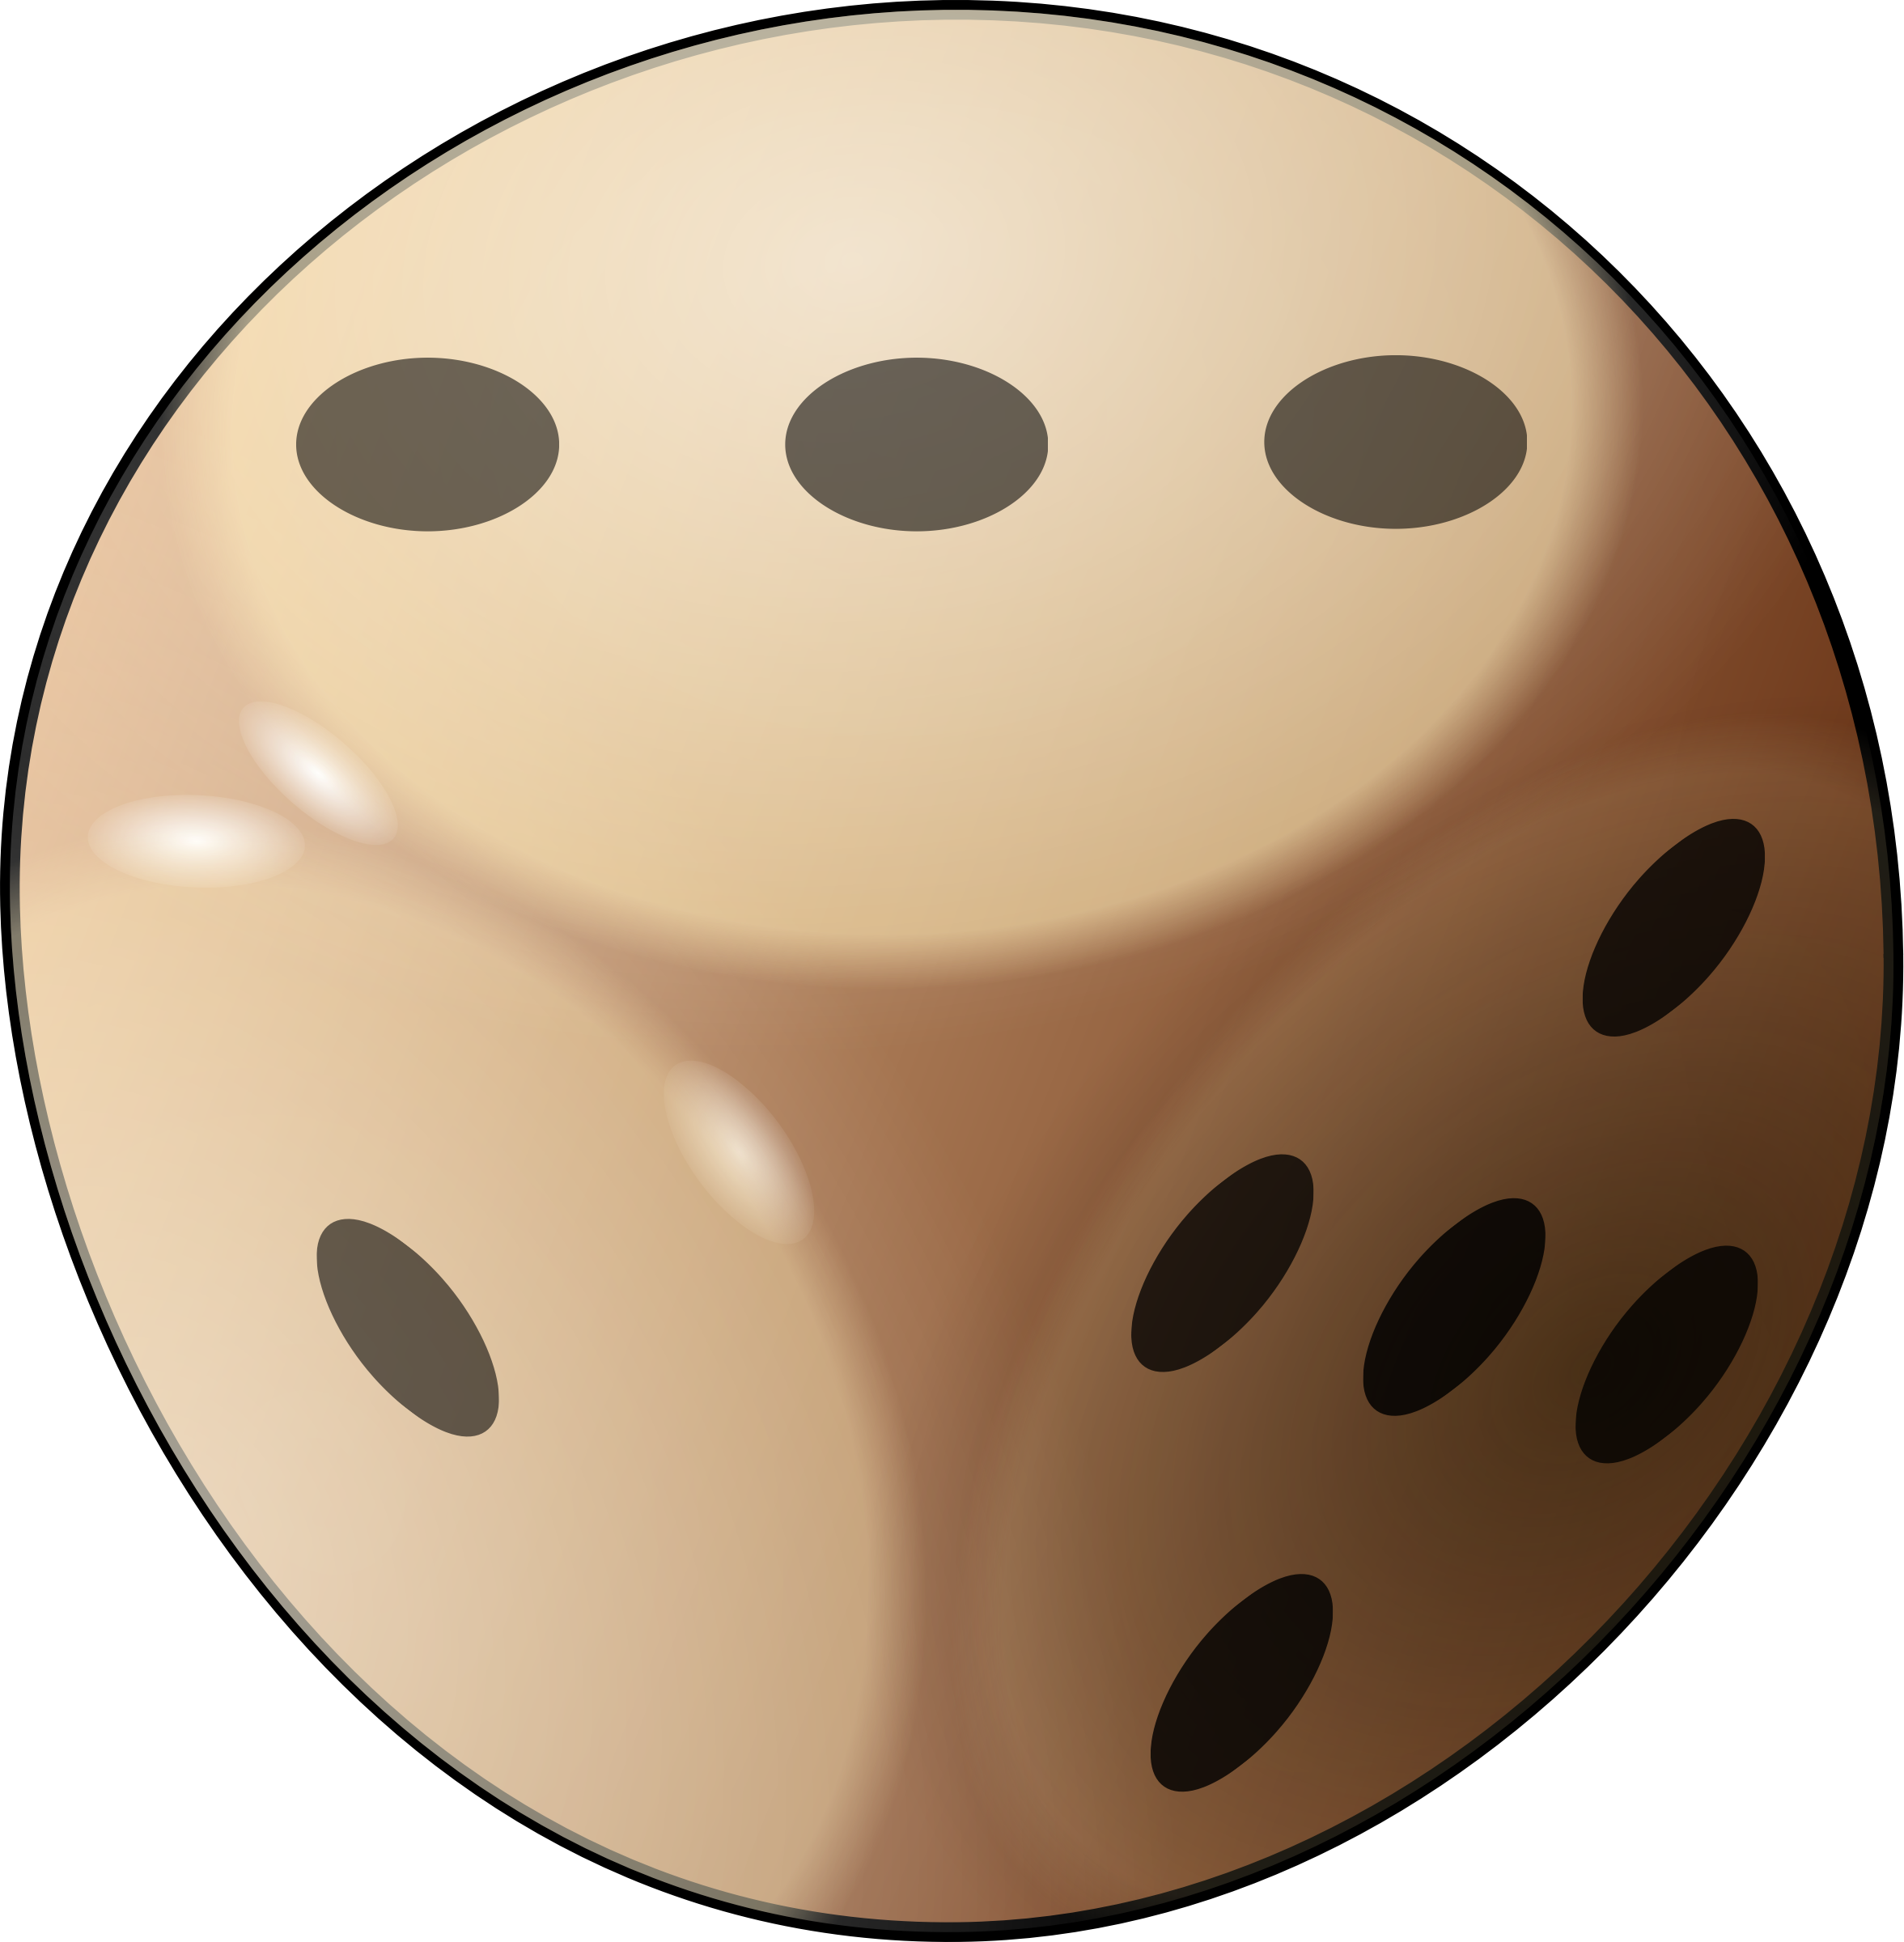 1 Dice Clipart Free Clipart Images Image - 3 On Dice (2353x2400)